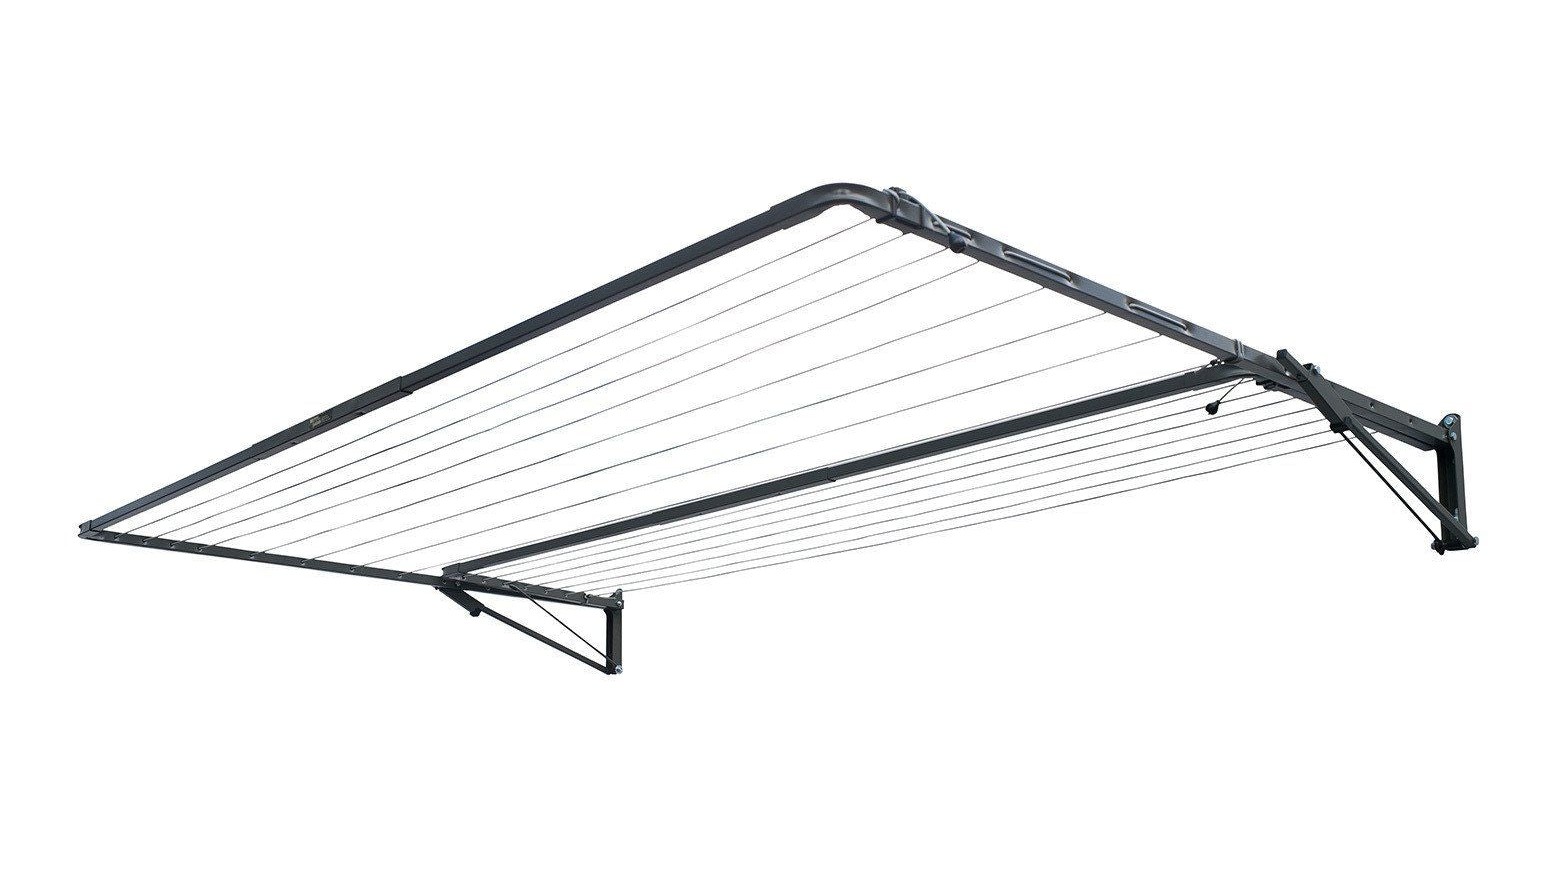 Austral Addaline 35 top fold down clothesline from hills